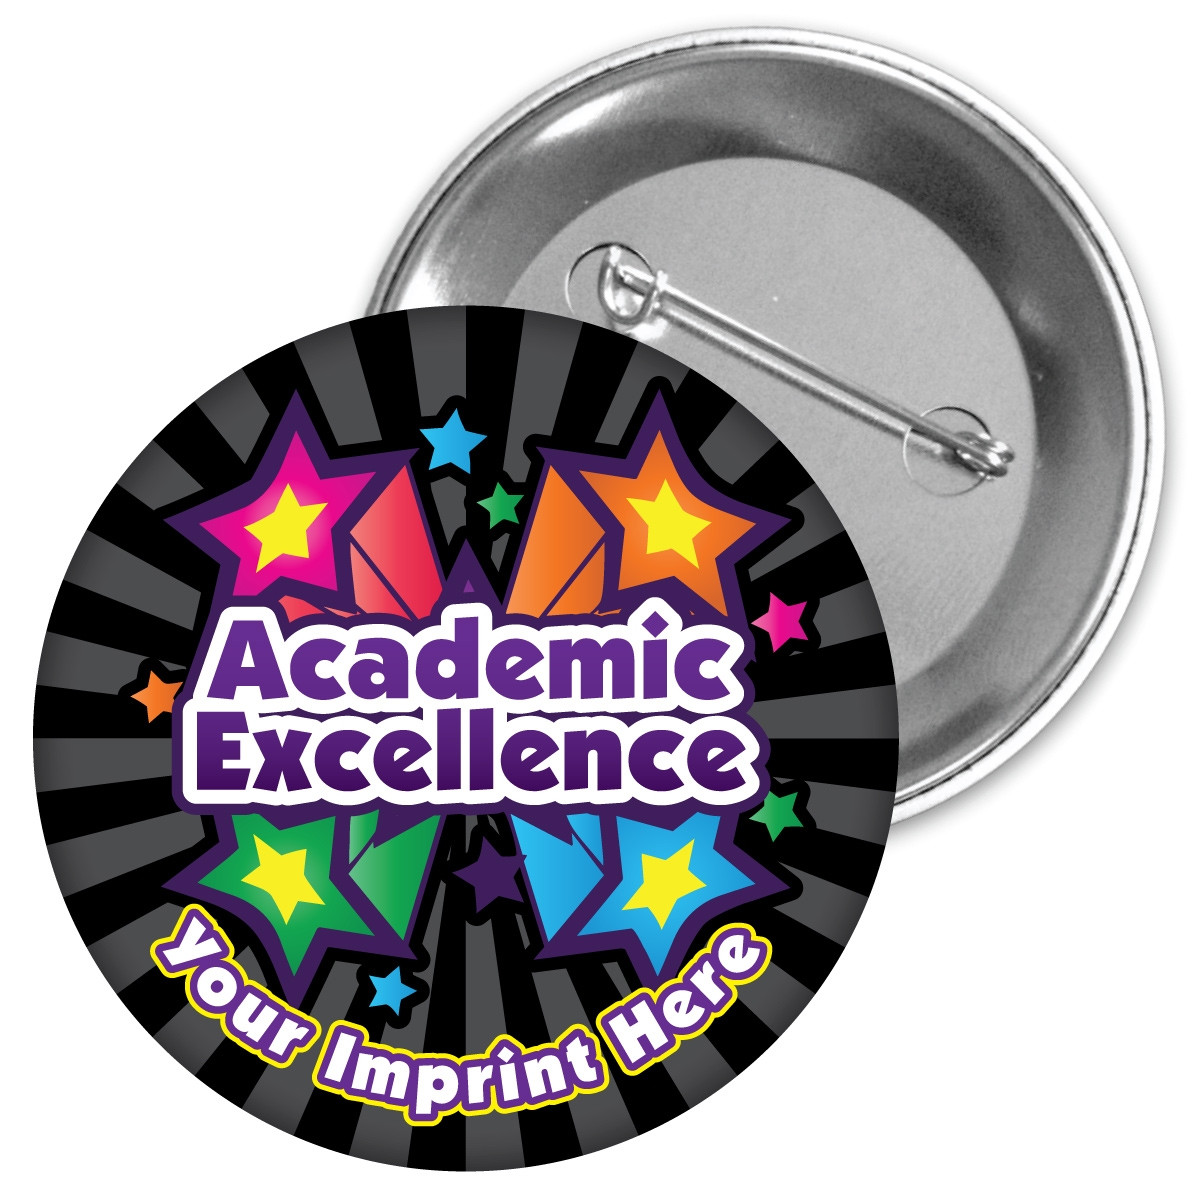 Custom Metal Button - Academic Excellence 